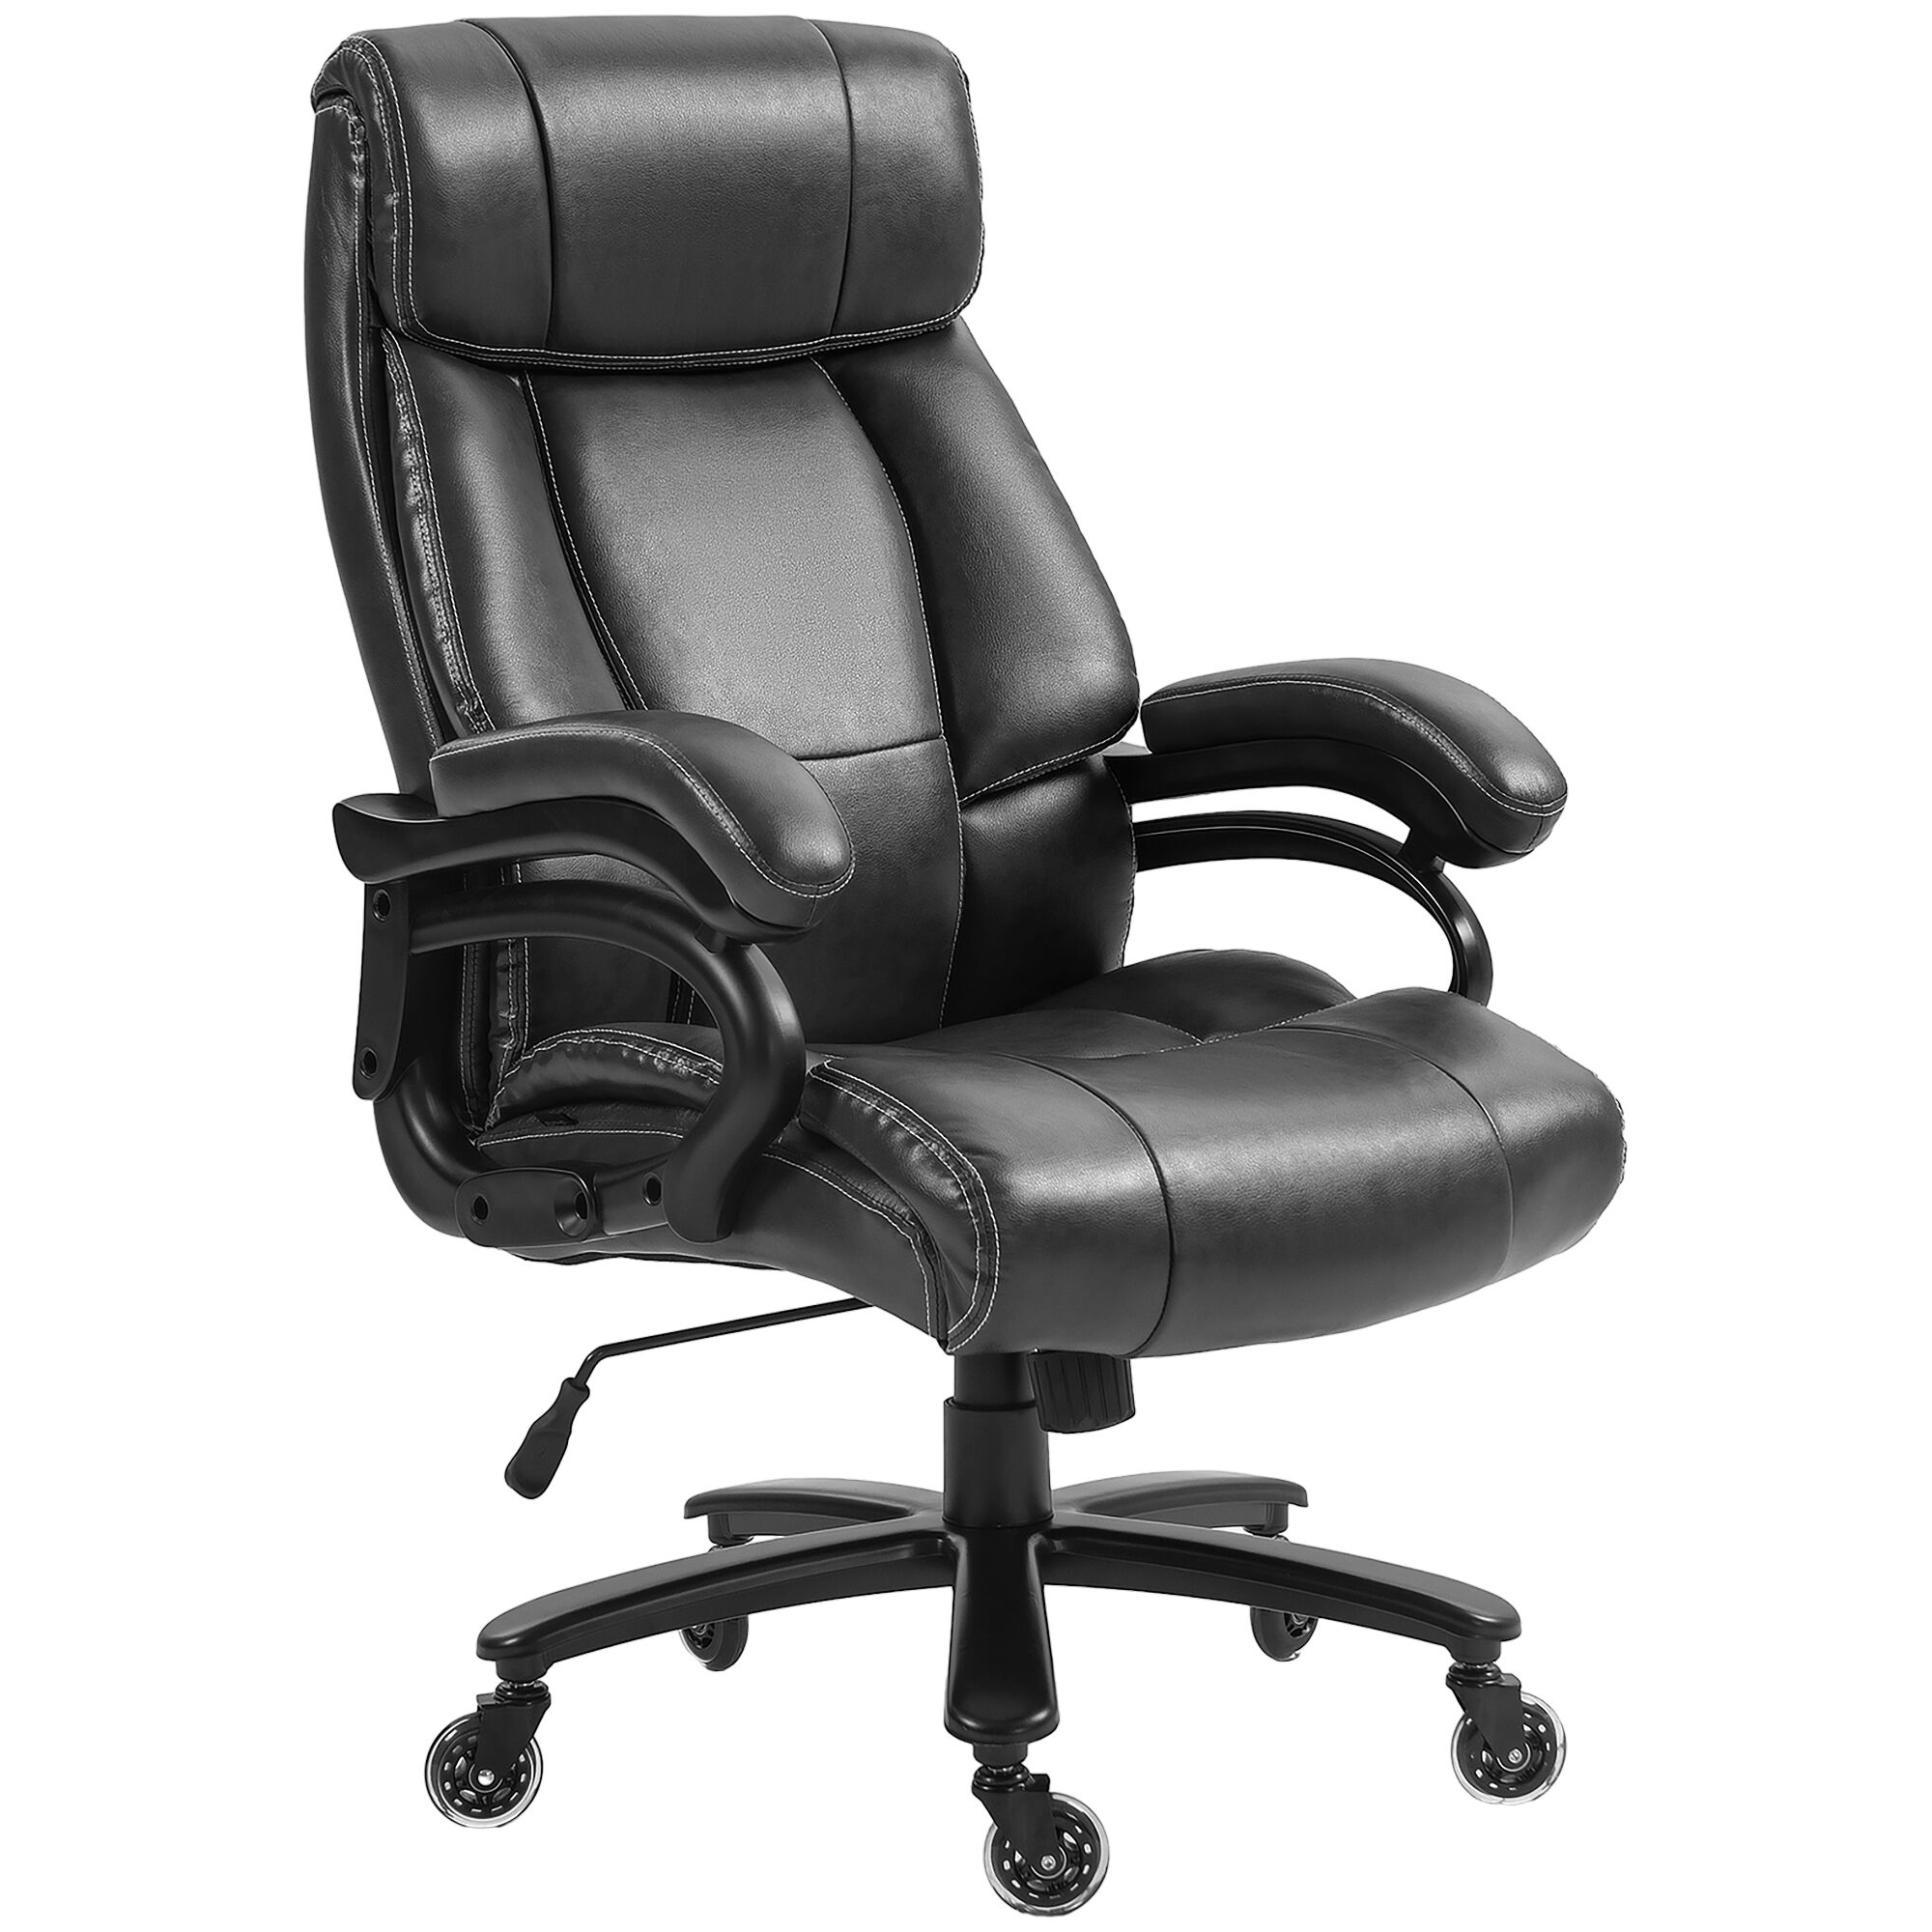 Vinsetto Big and Tall Office Chair, 400 lbs, Executive Comfy Computer Chair with PU Leather, Swivel Wheels, Black